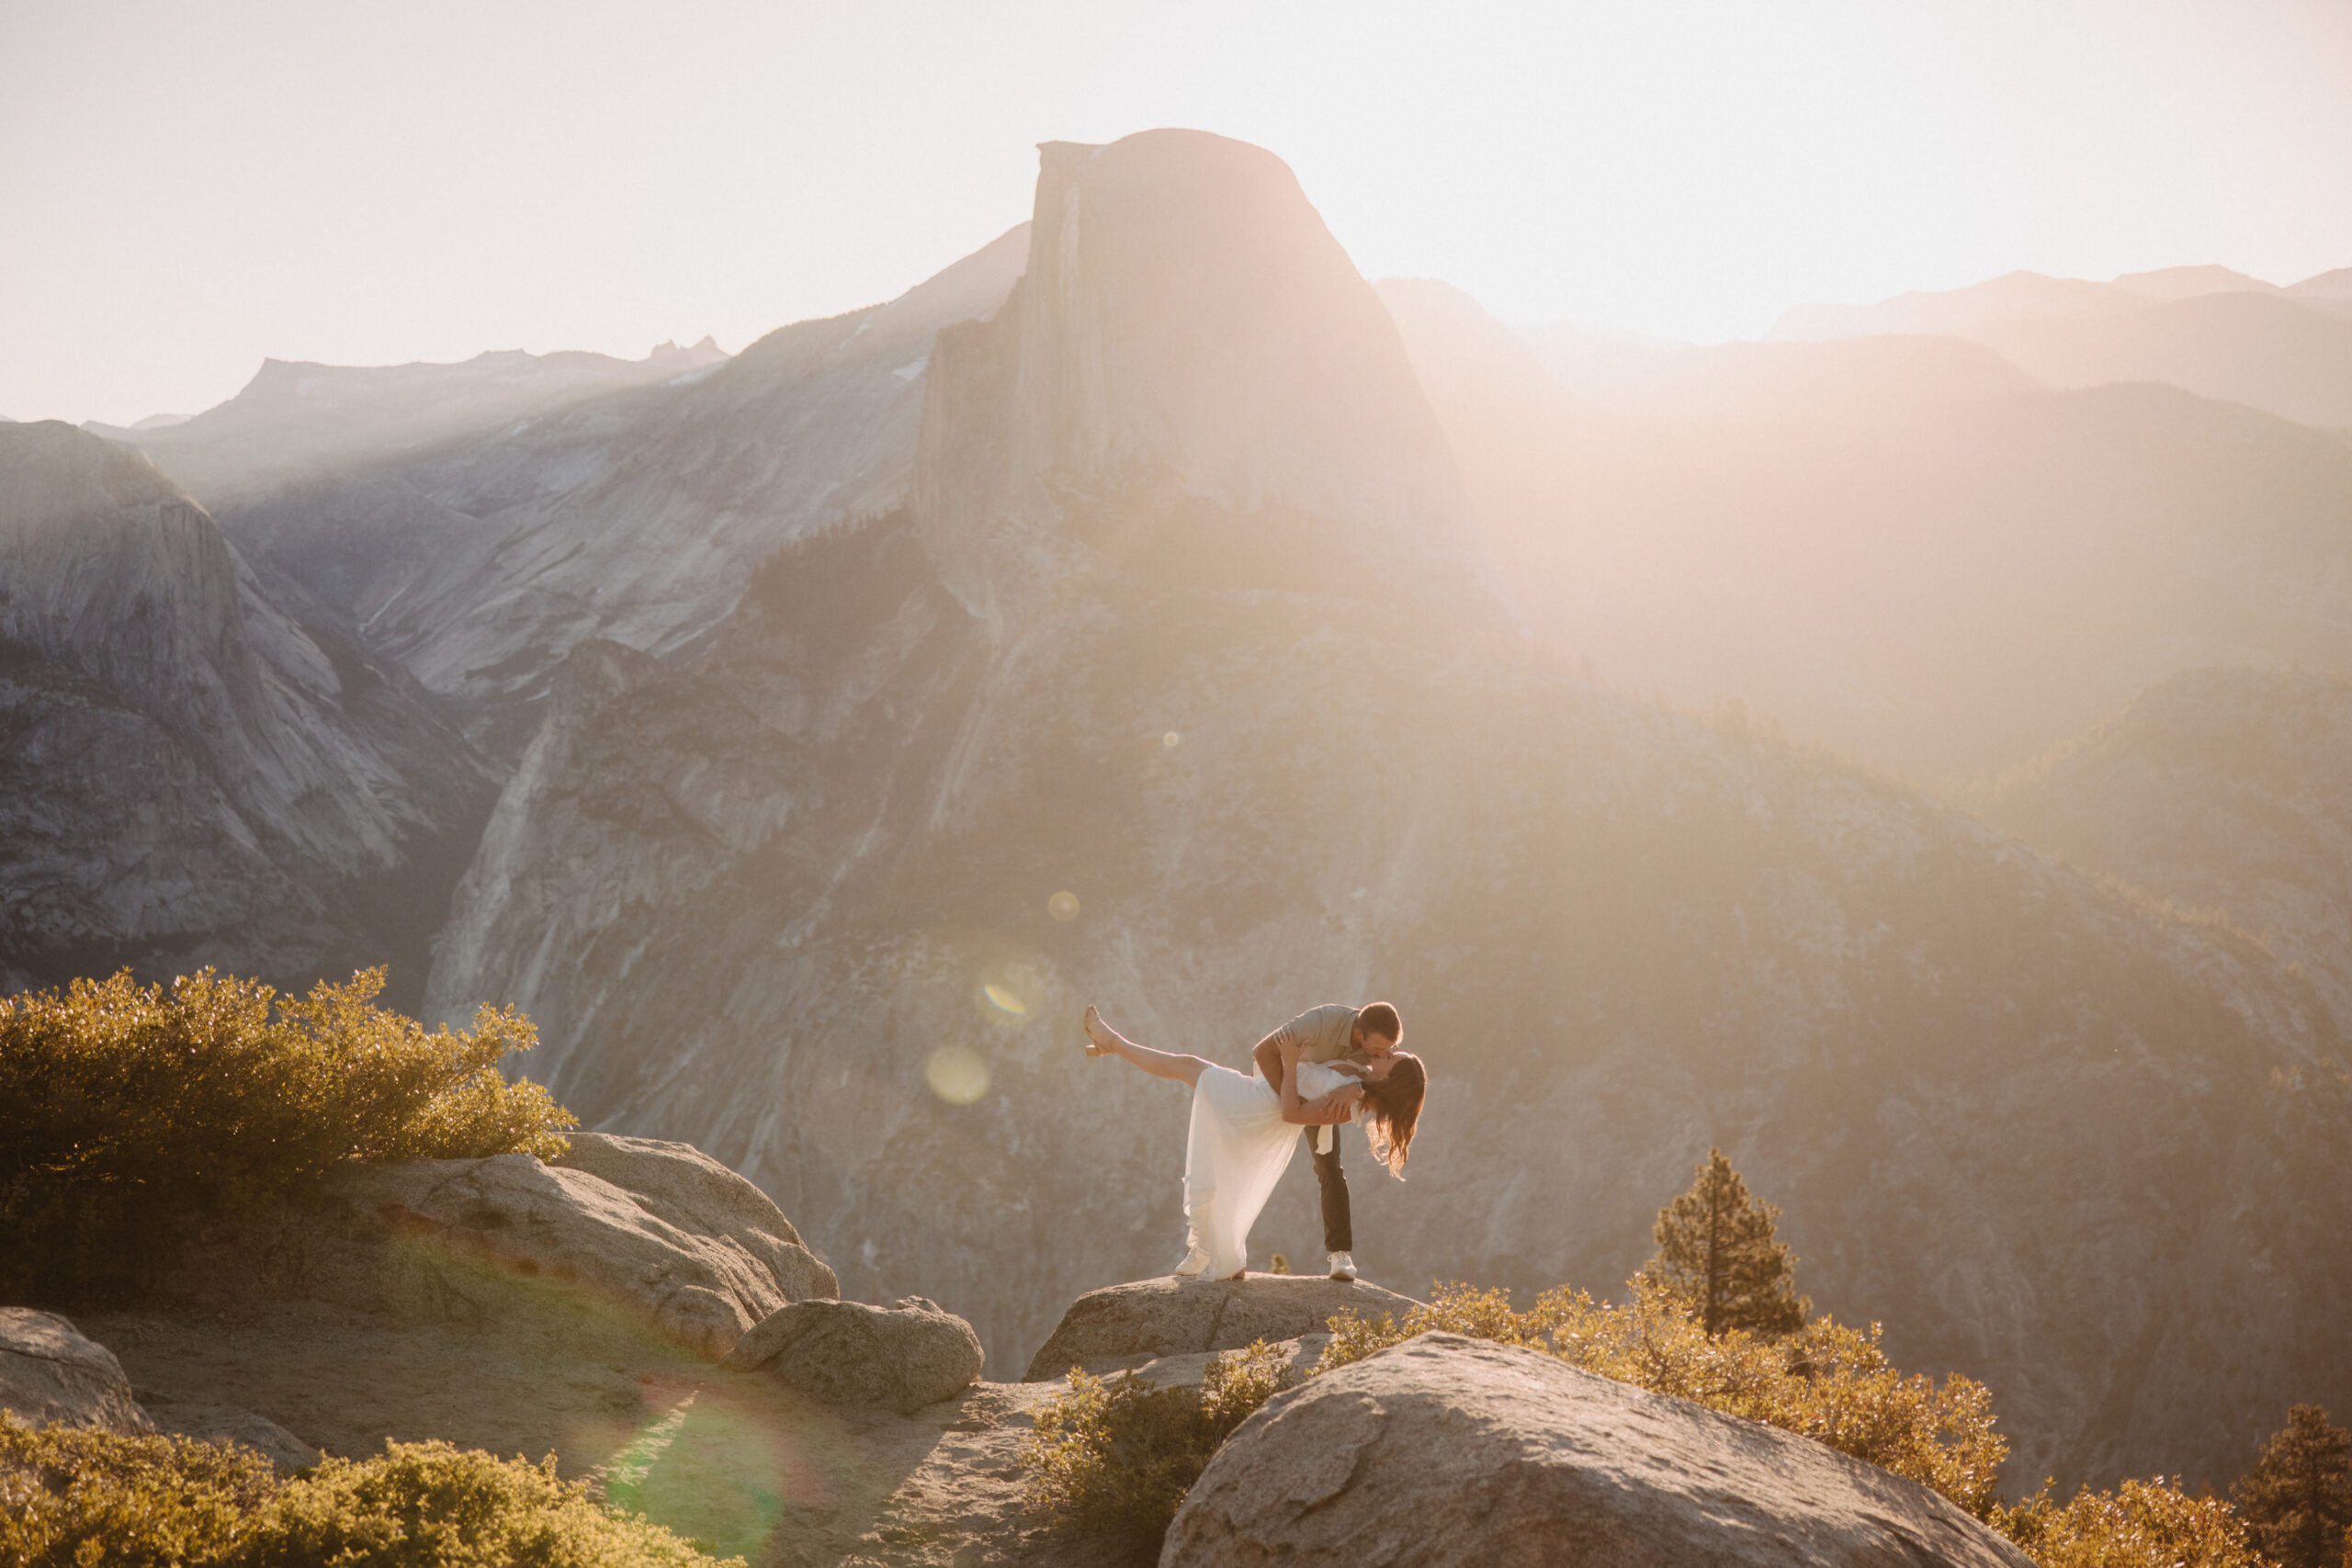 A couple stands on a cliff at sunset, sharing a kiss with a mountainous landscape behind them.